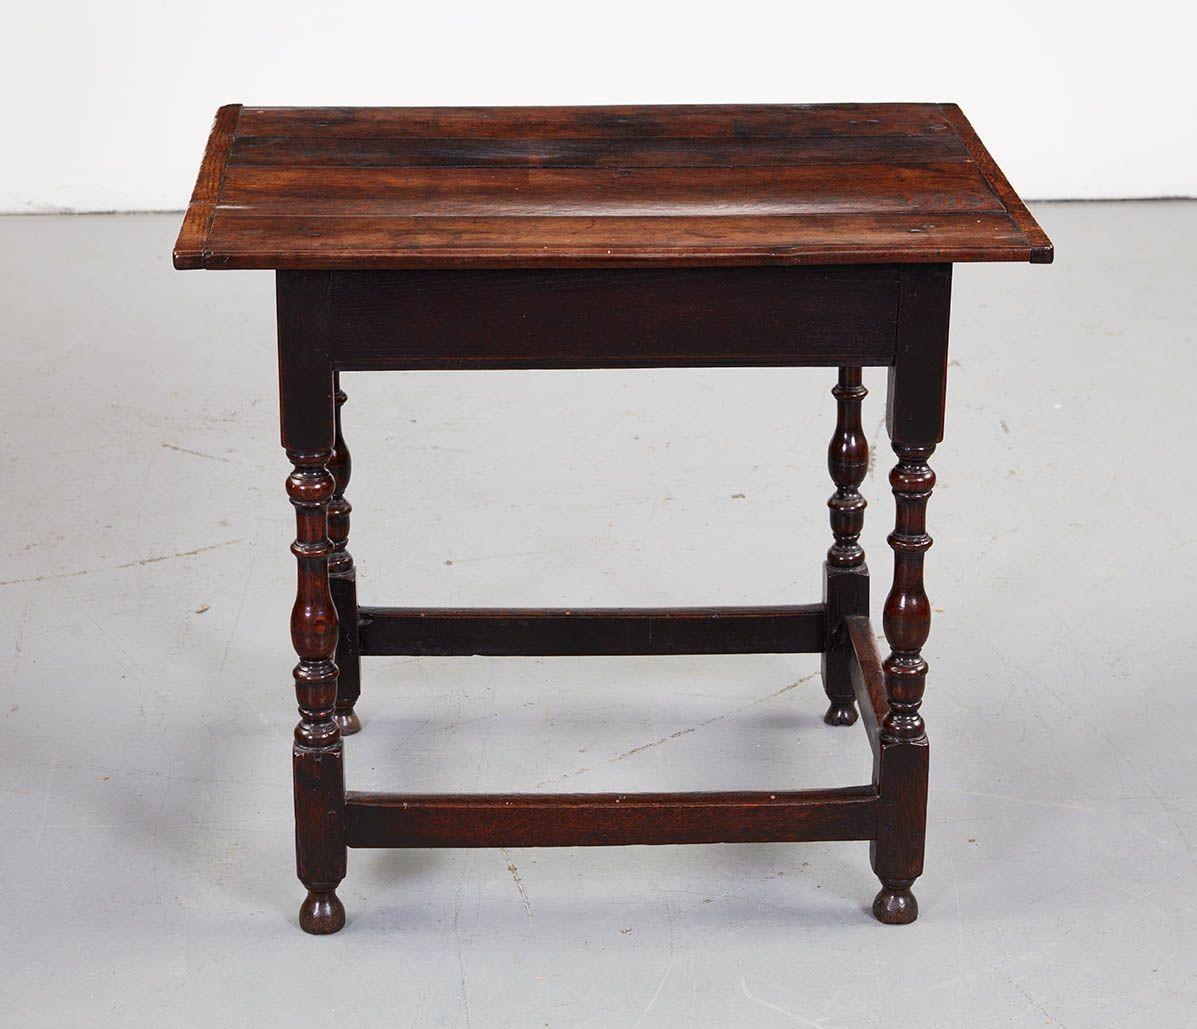 18th Century English oak rectangular center table having planked top with end cleats over baluster turned legs joined by lower box stretcher. Good color.